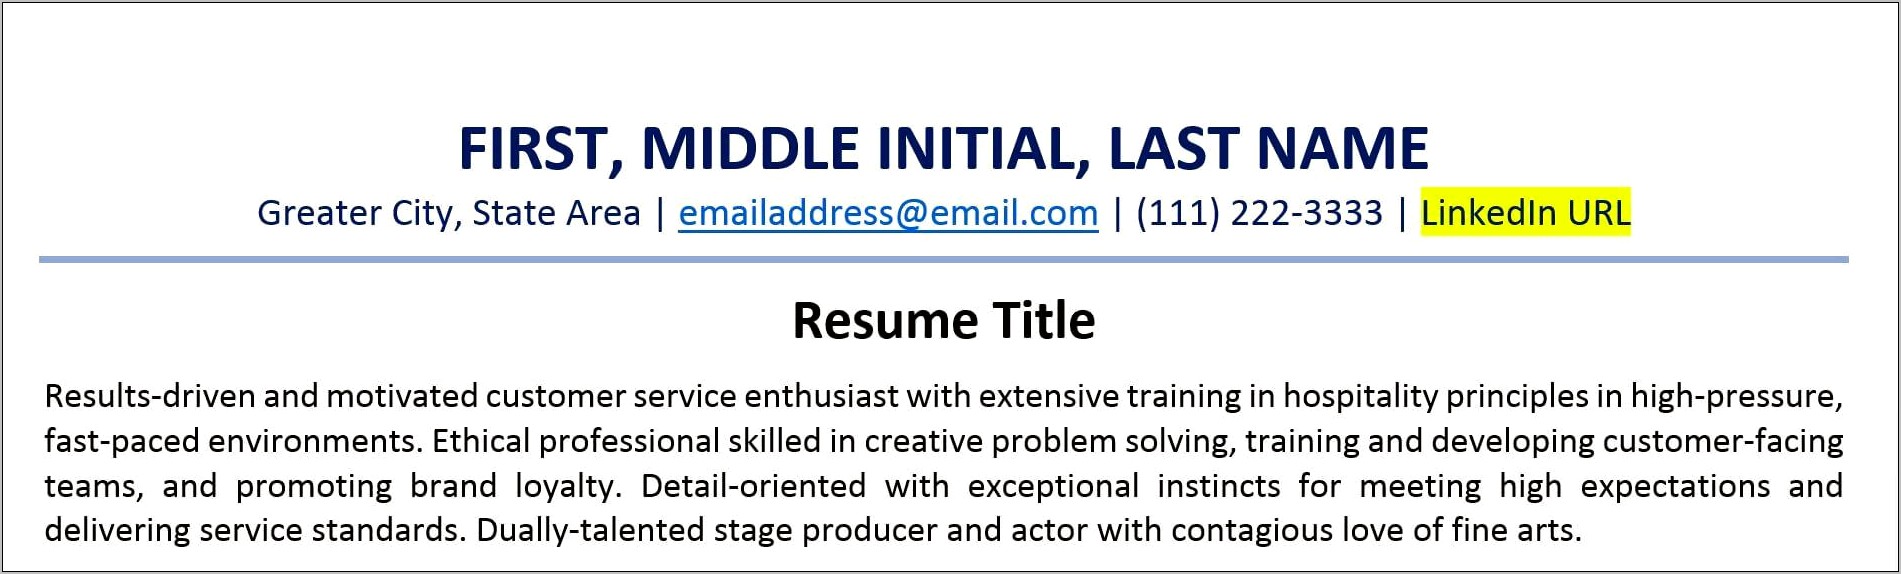 Example Resume With Linkedin Link